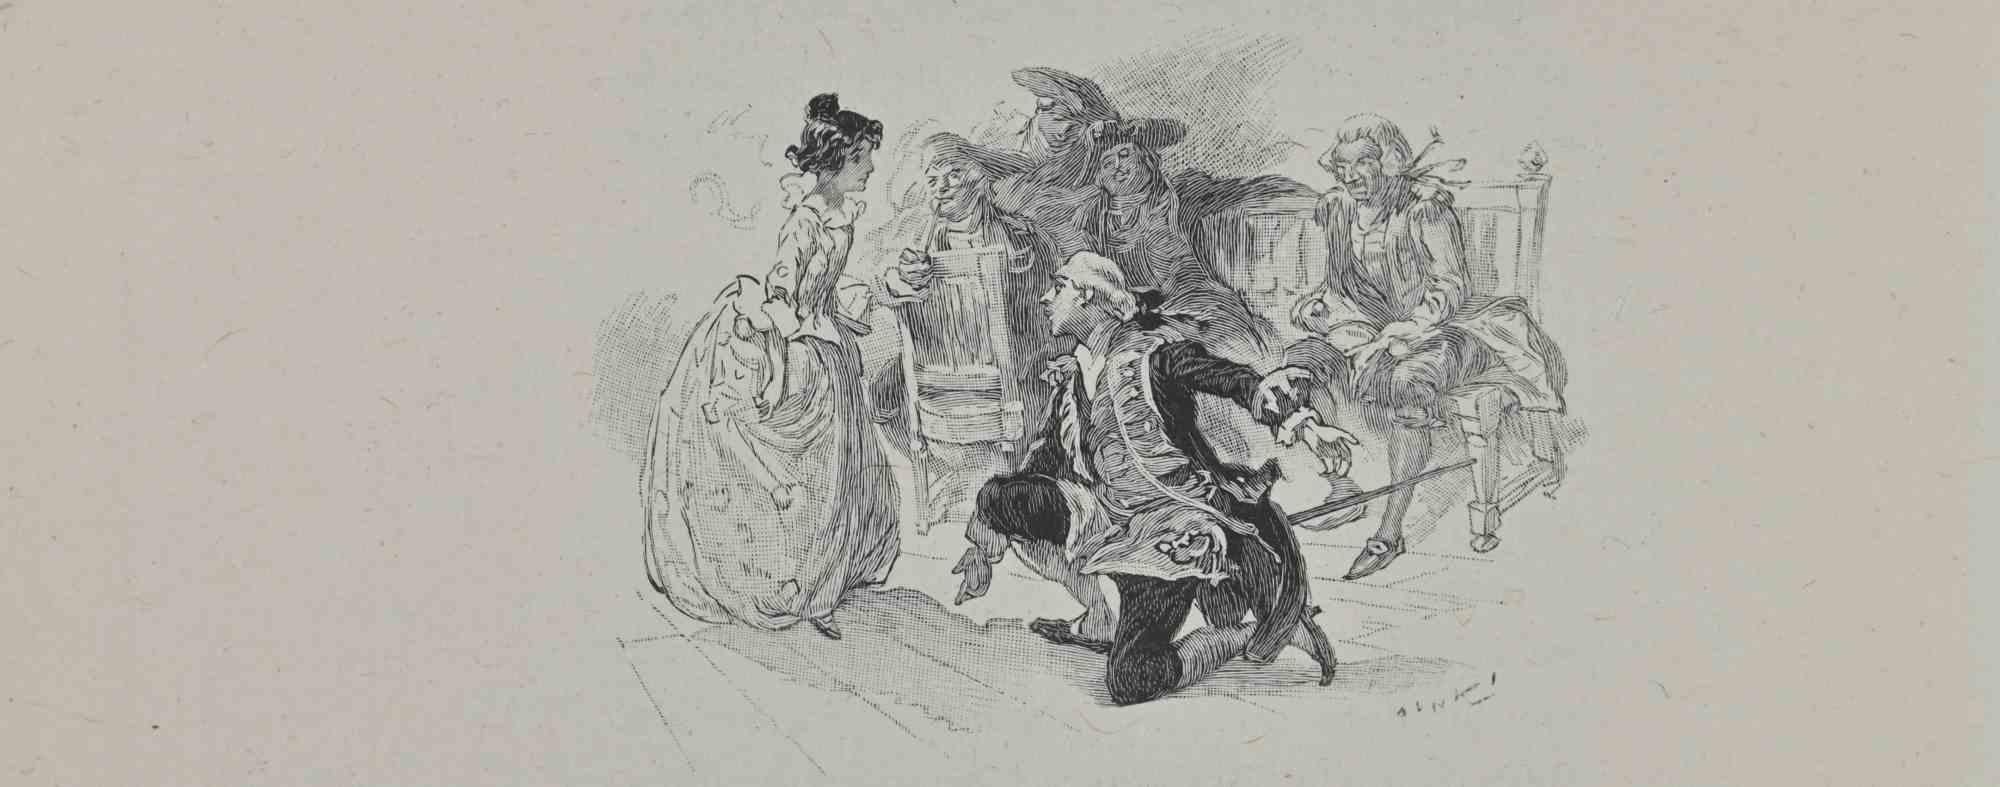 The Courtship is a lithograph on paper realized by Hégésippe Moreau in 1838.

The artwork is in good conditions.

Hégésippe Moreau (1810-1838) was a French lyric poet. The romantic myth was solidified by the publication of his complete works;